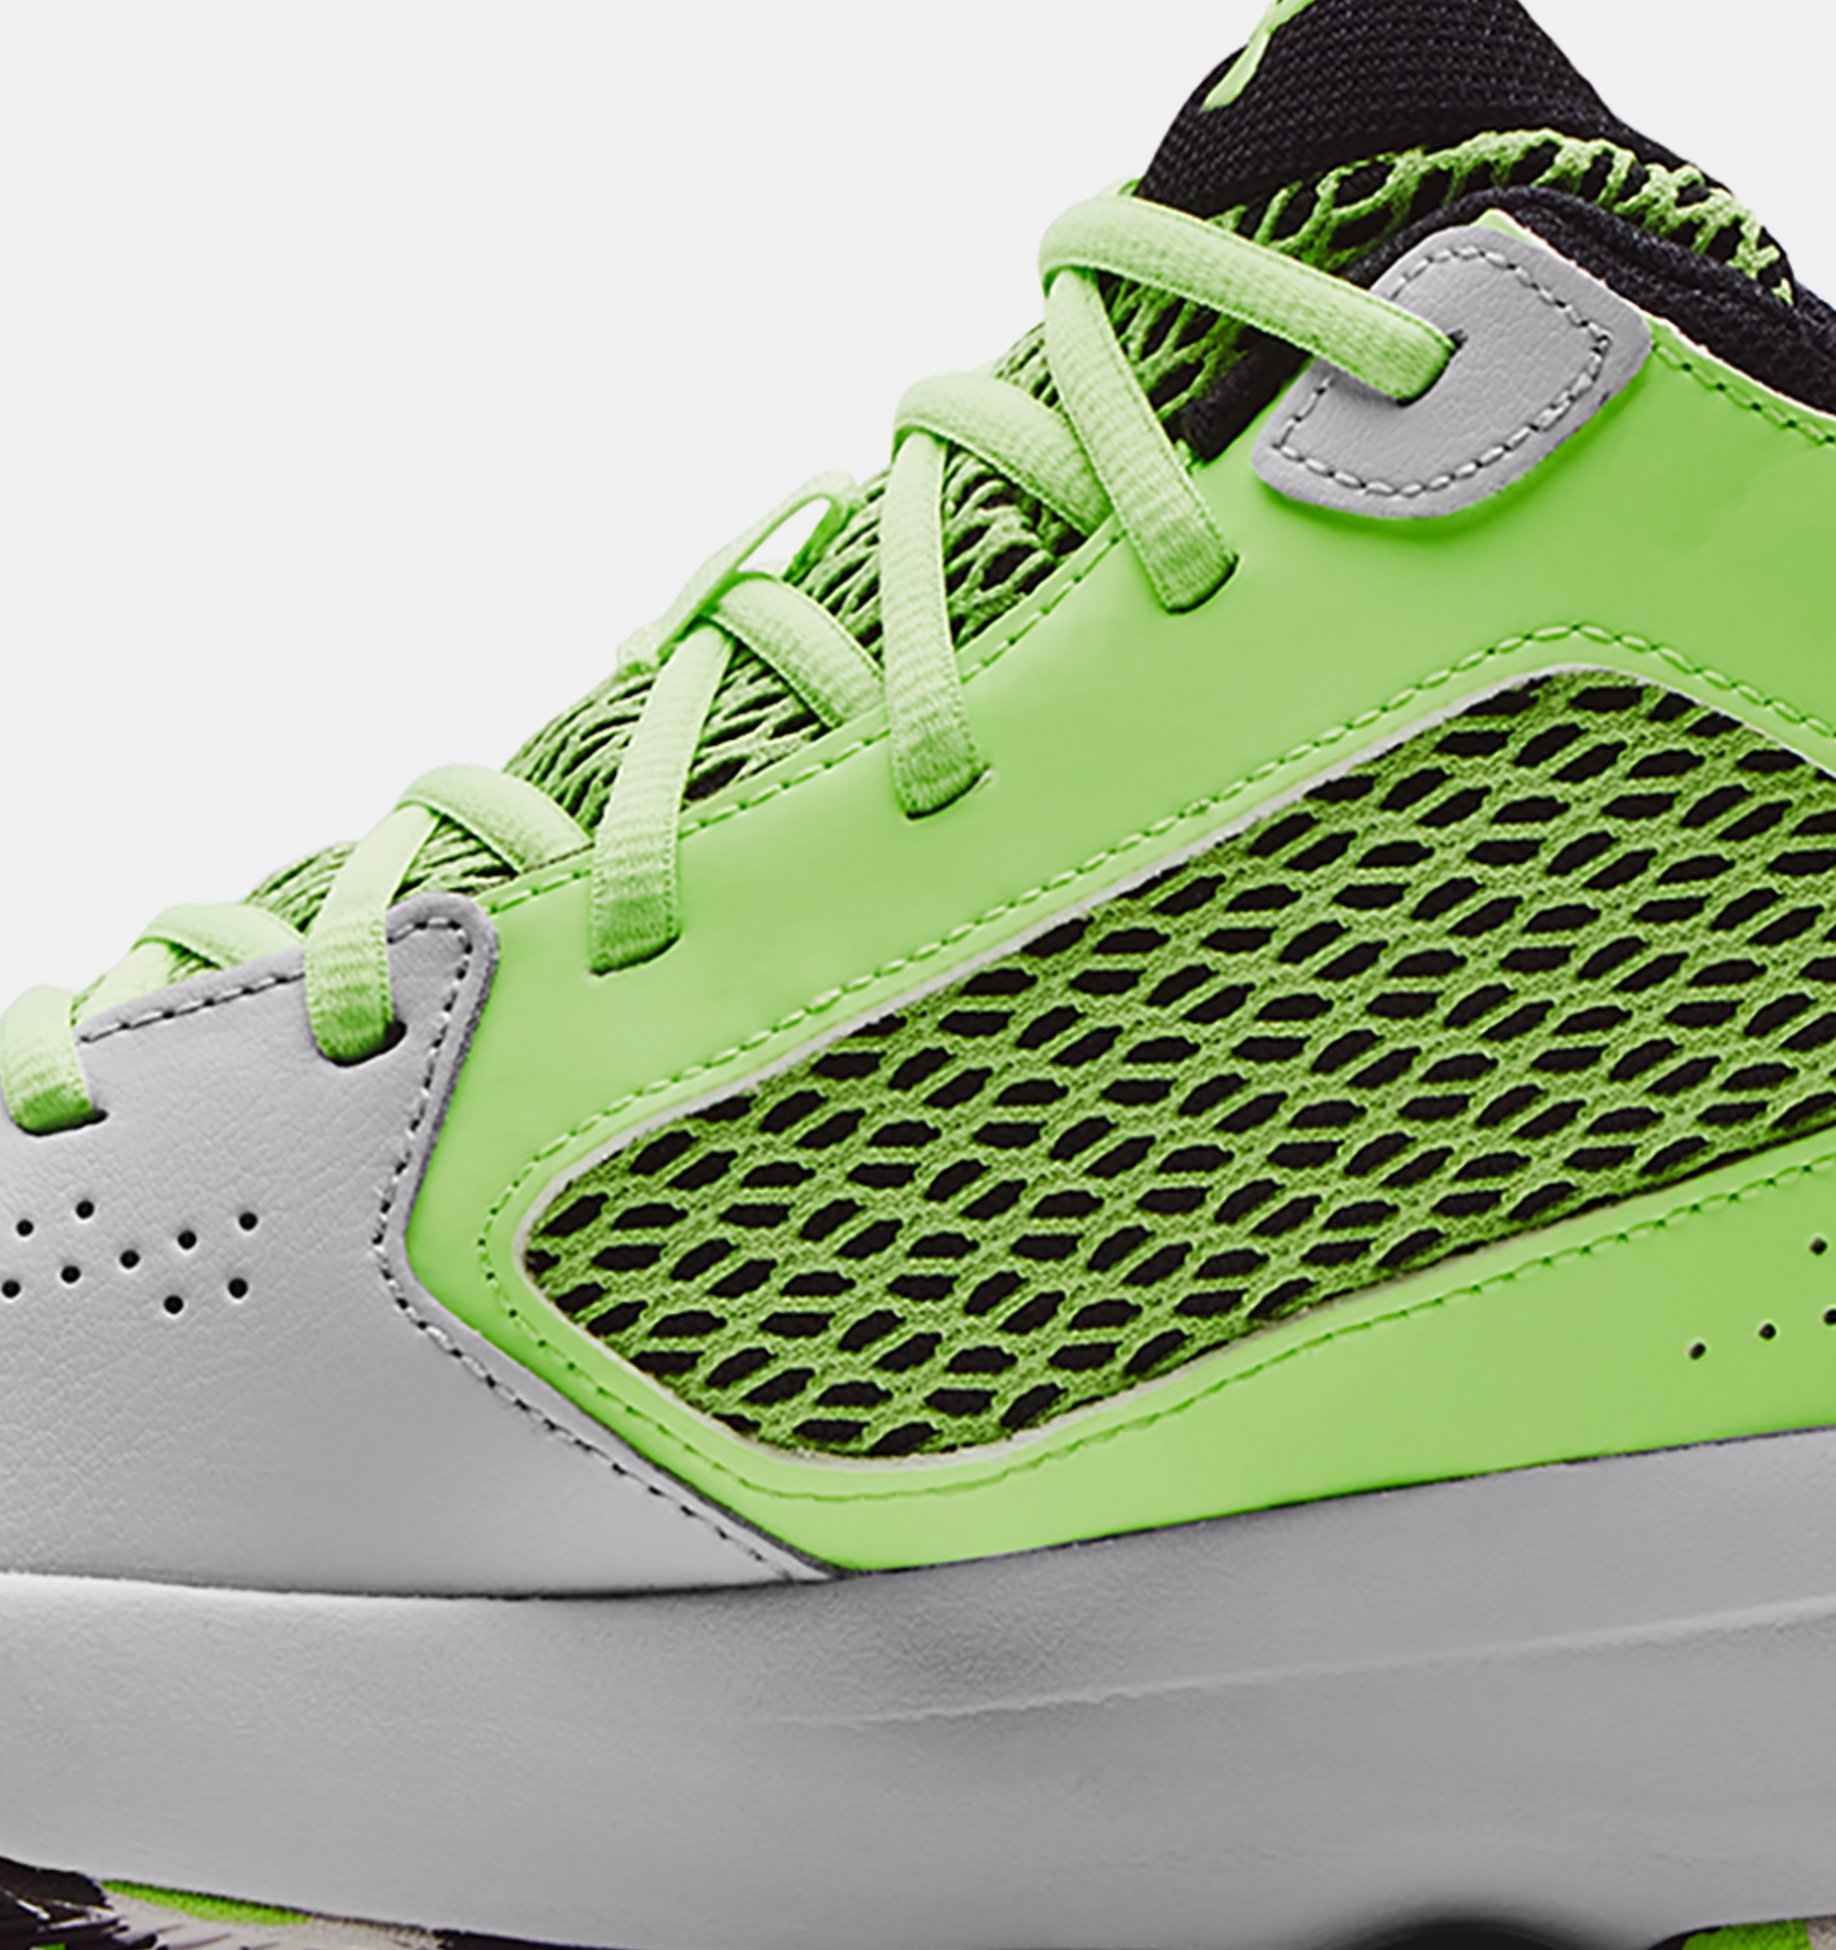 Lockdown 5 Basketball Shoes | Armour